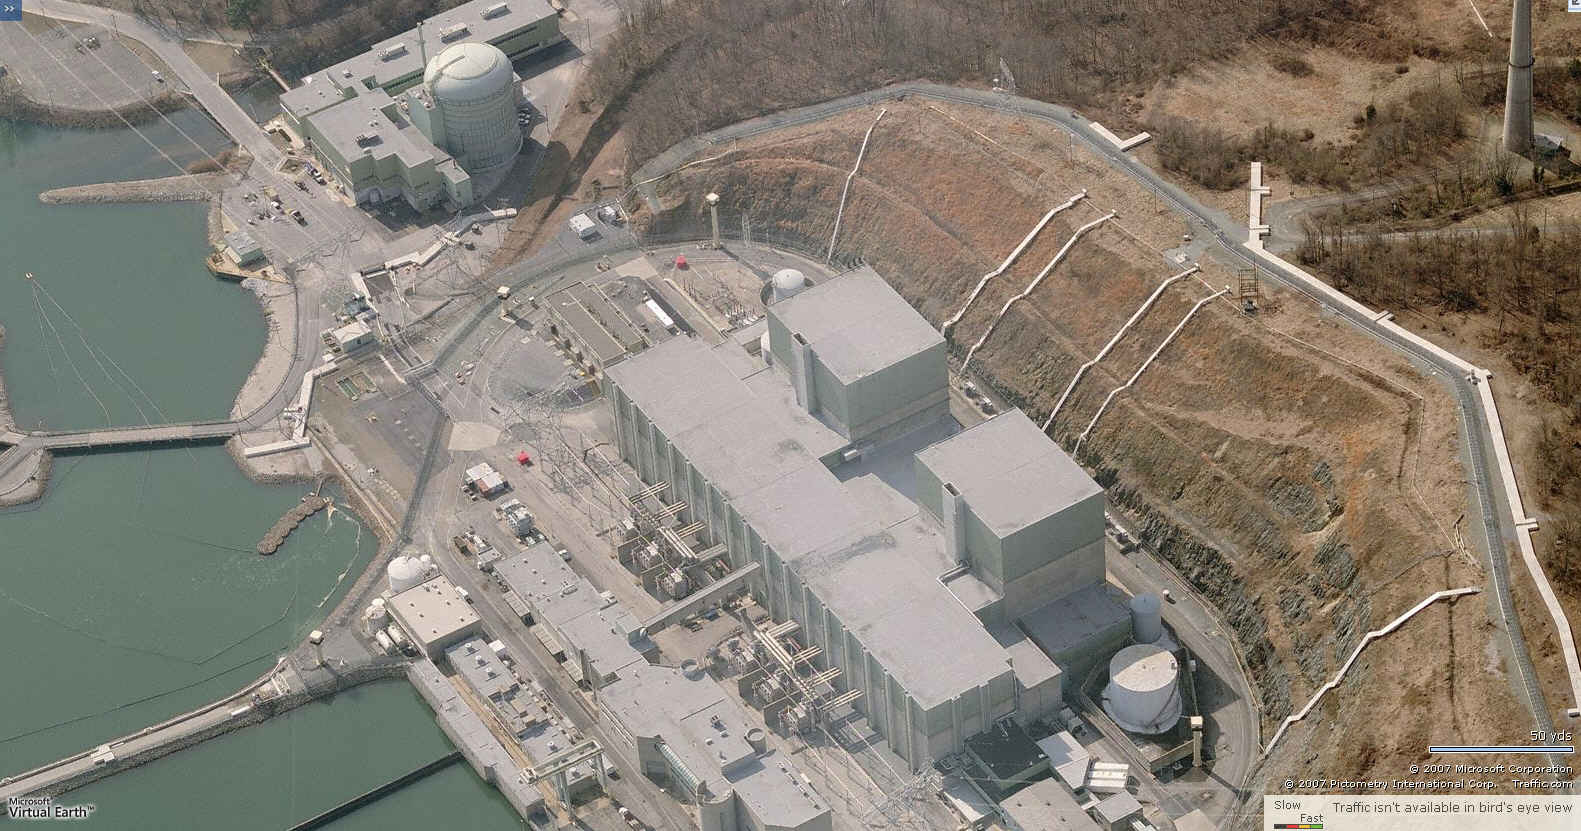 Pennsylvania's Peach Bottom reactors are among 18 that must re-evaluate their ability to withstand earthquakes. Here's betting Peach Bottom won't be qualified. Photo from Cryptome.org